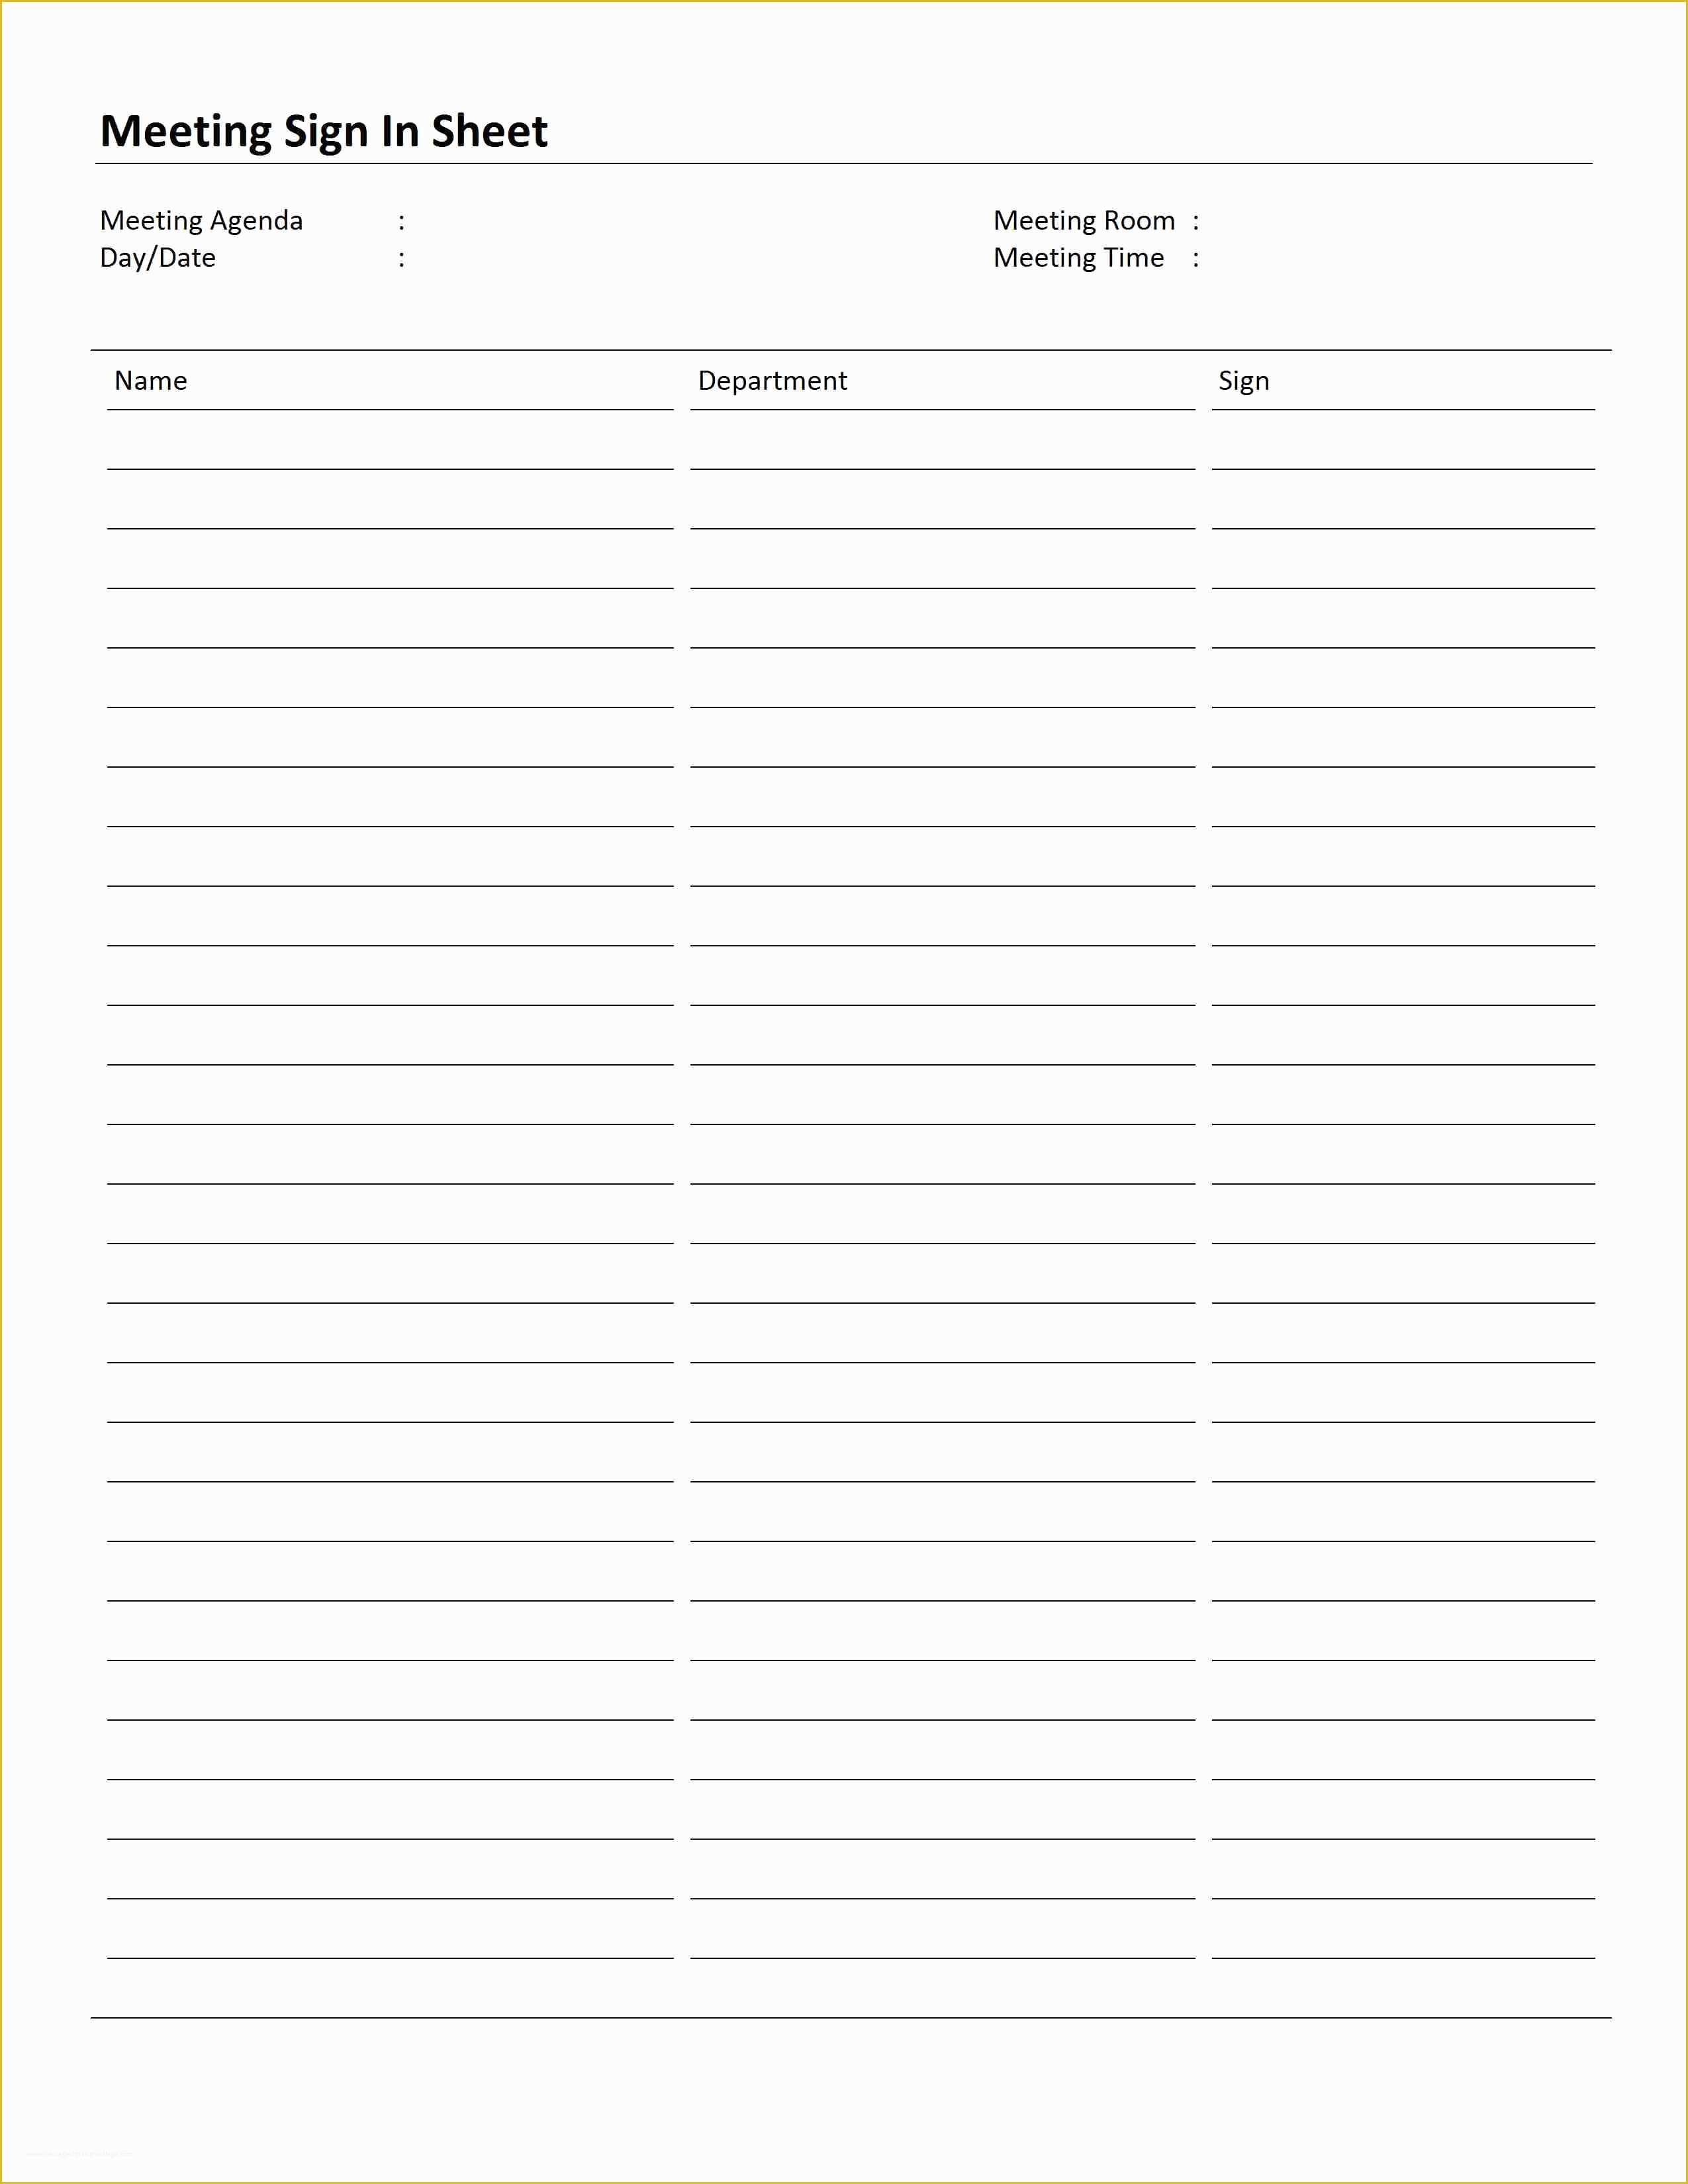 Free Sign In Sheet Template Of Meeting Sign In Sheet